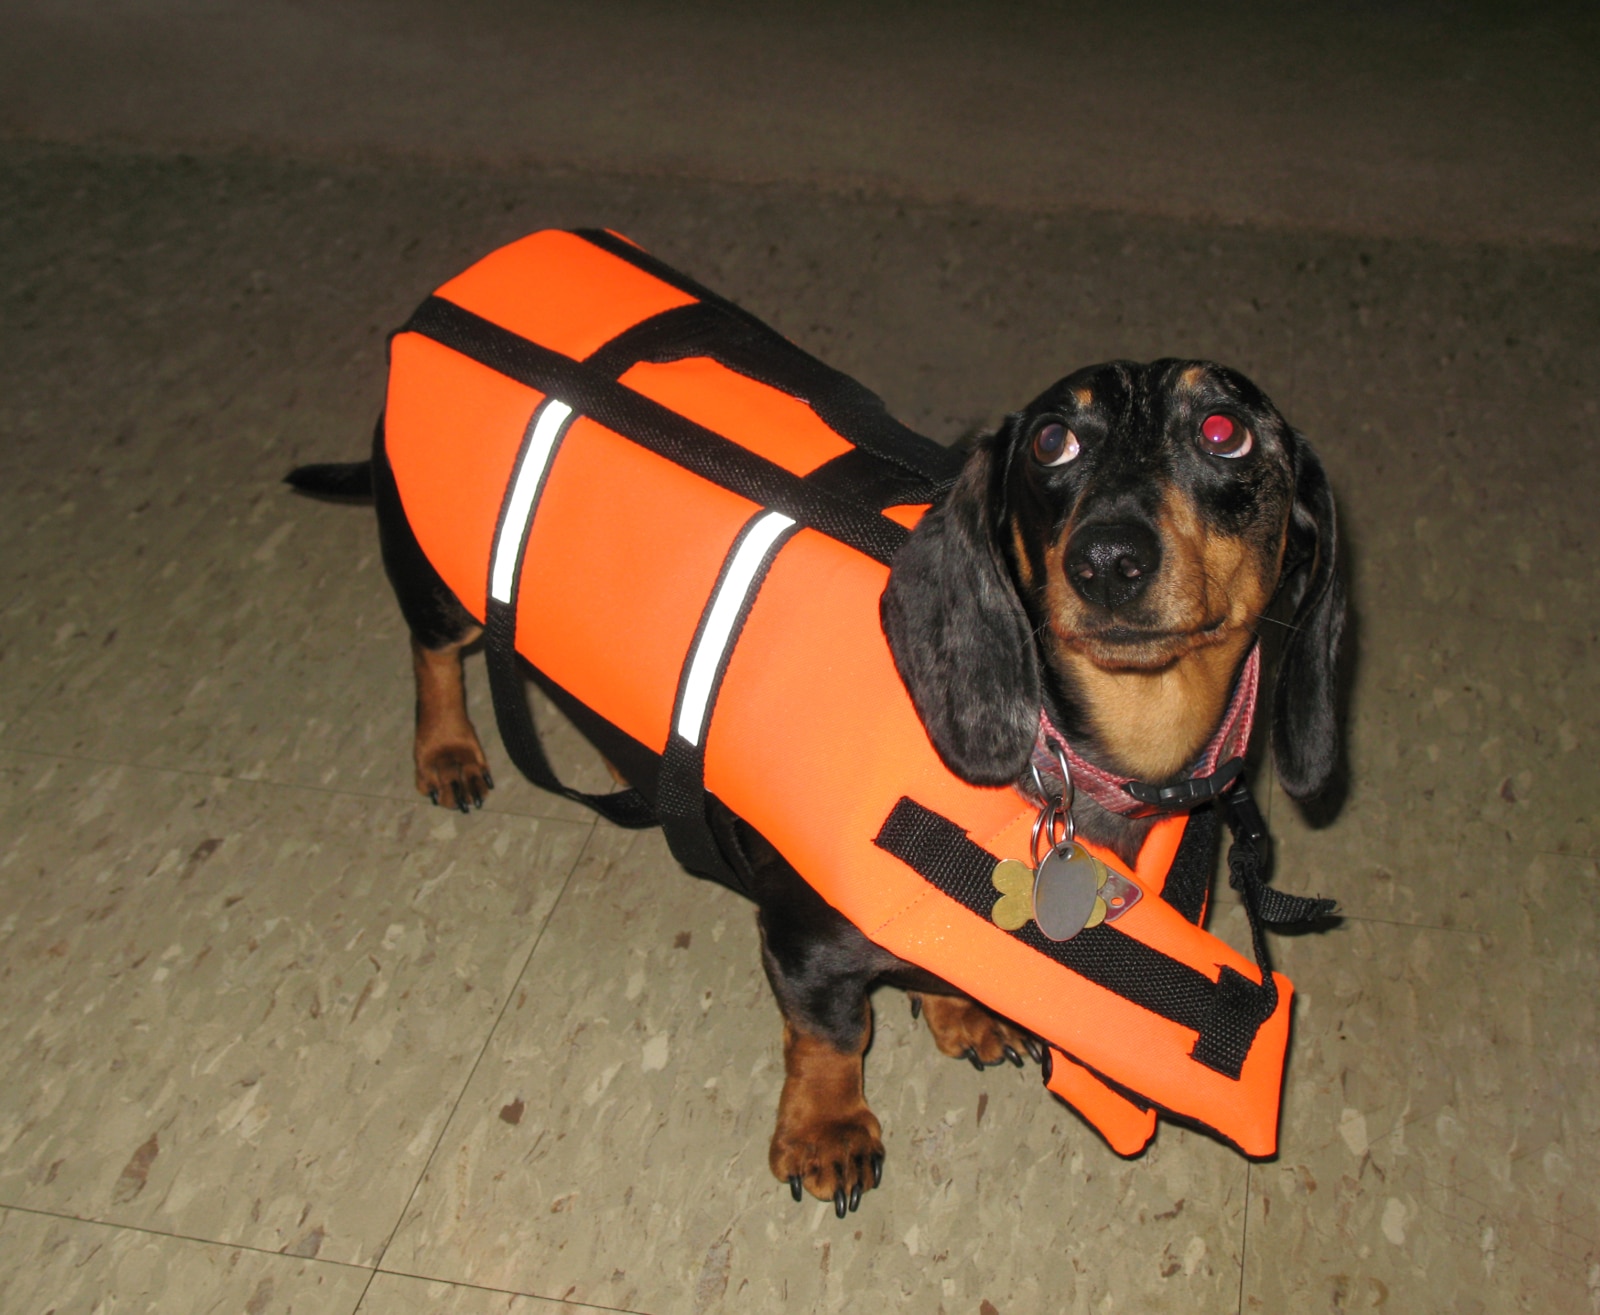 Water Safety Tips For Dachshunds